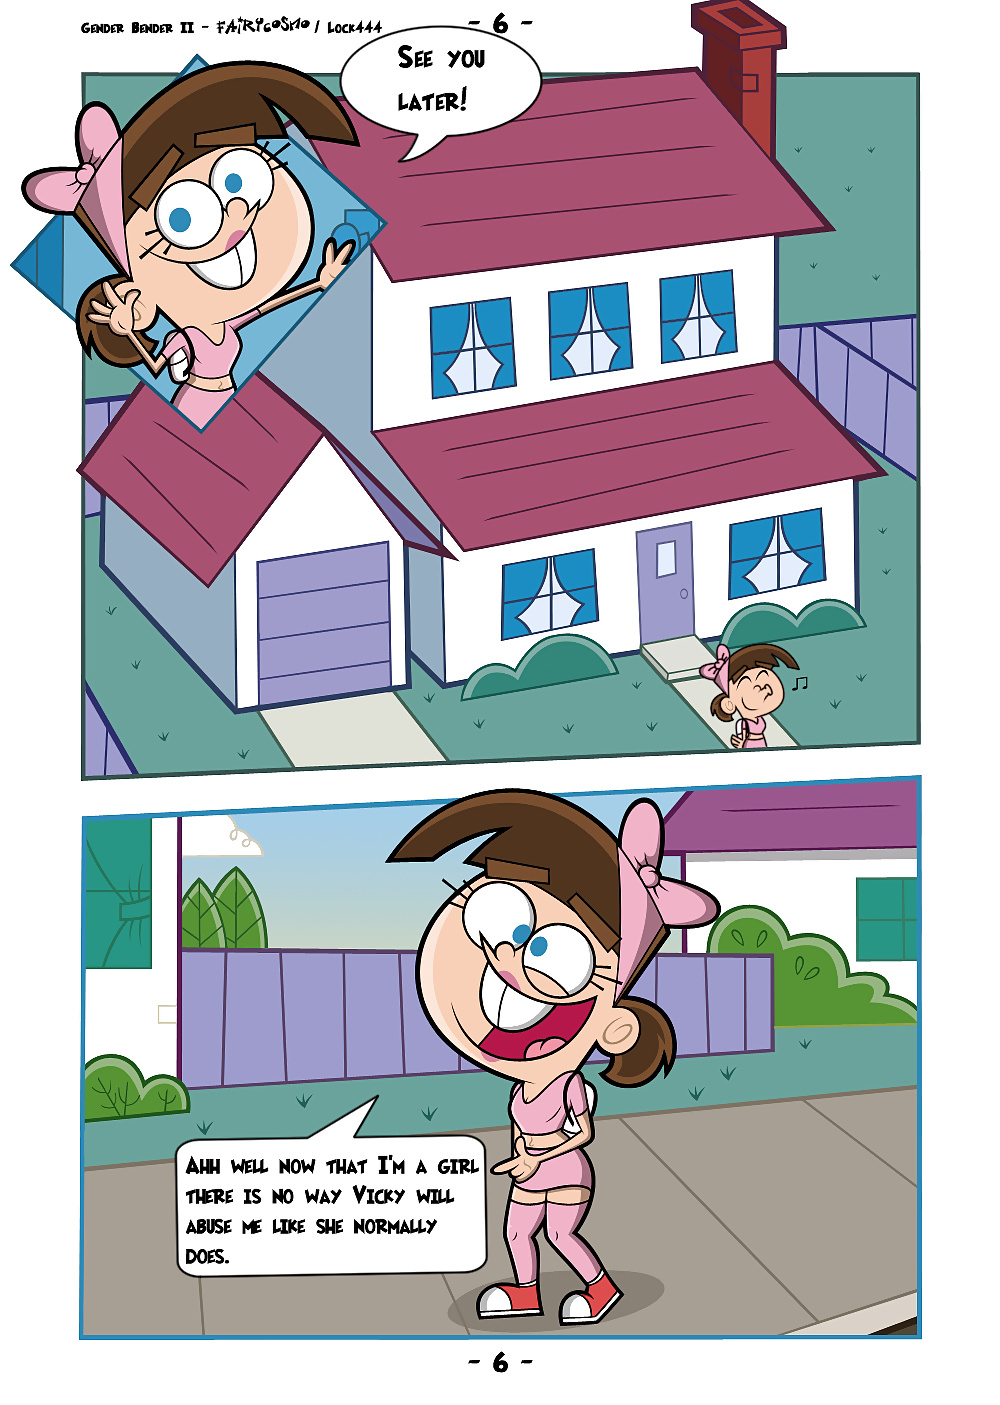 Fairly Oddparents #33464626